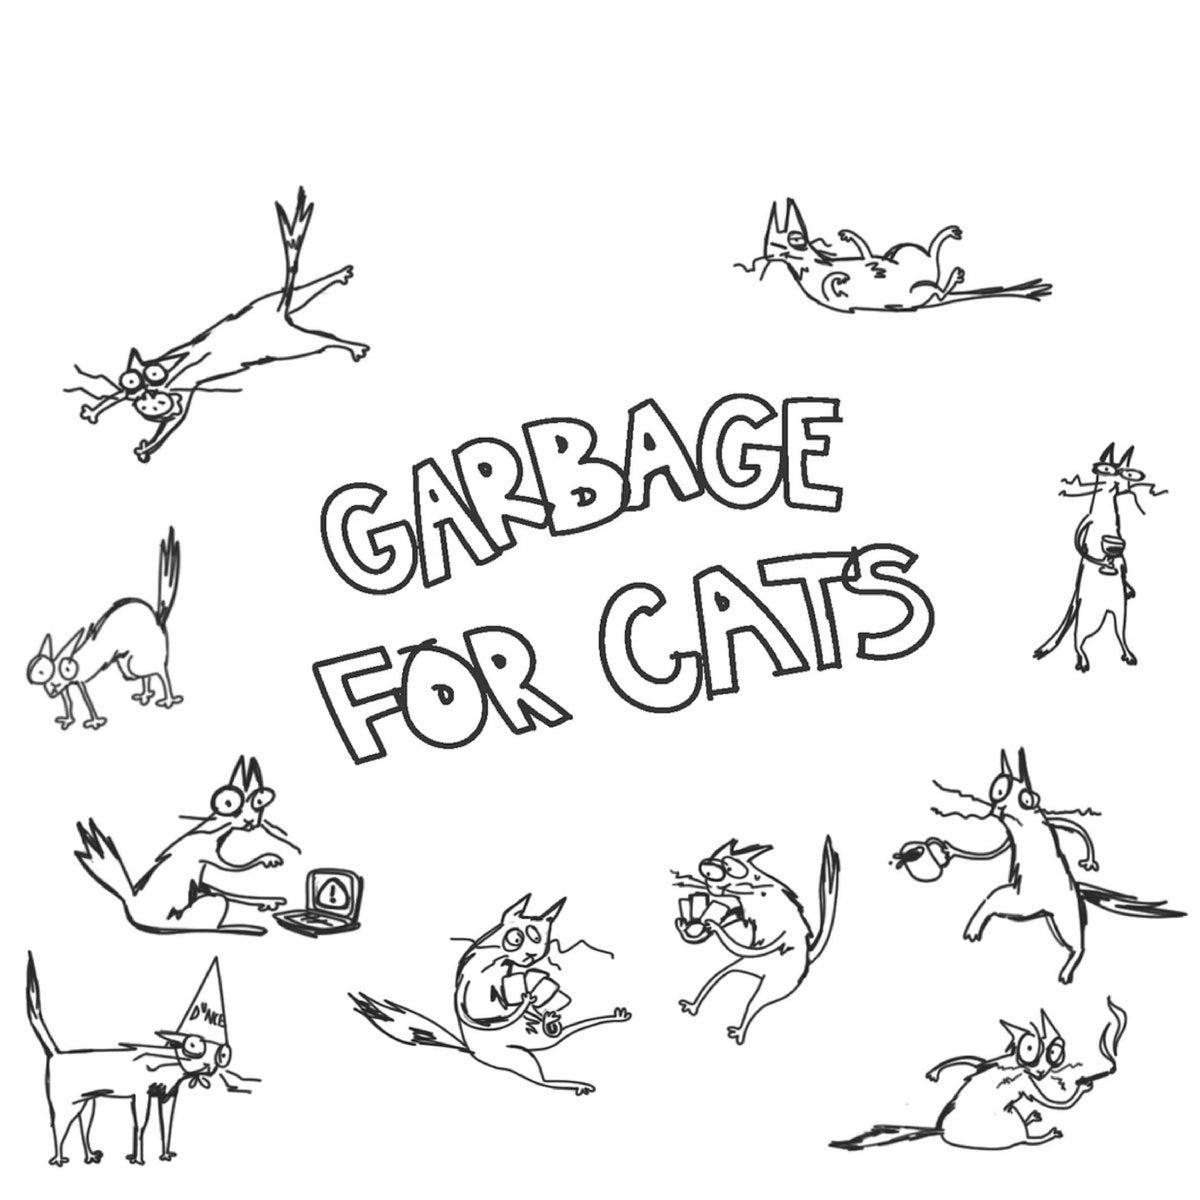 Garbage For Cats | Johmen